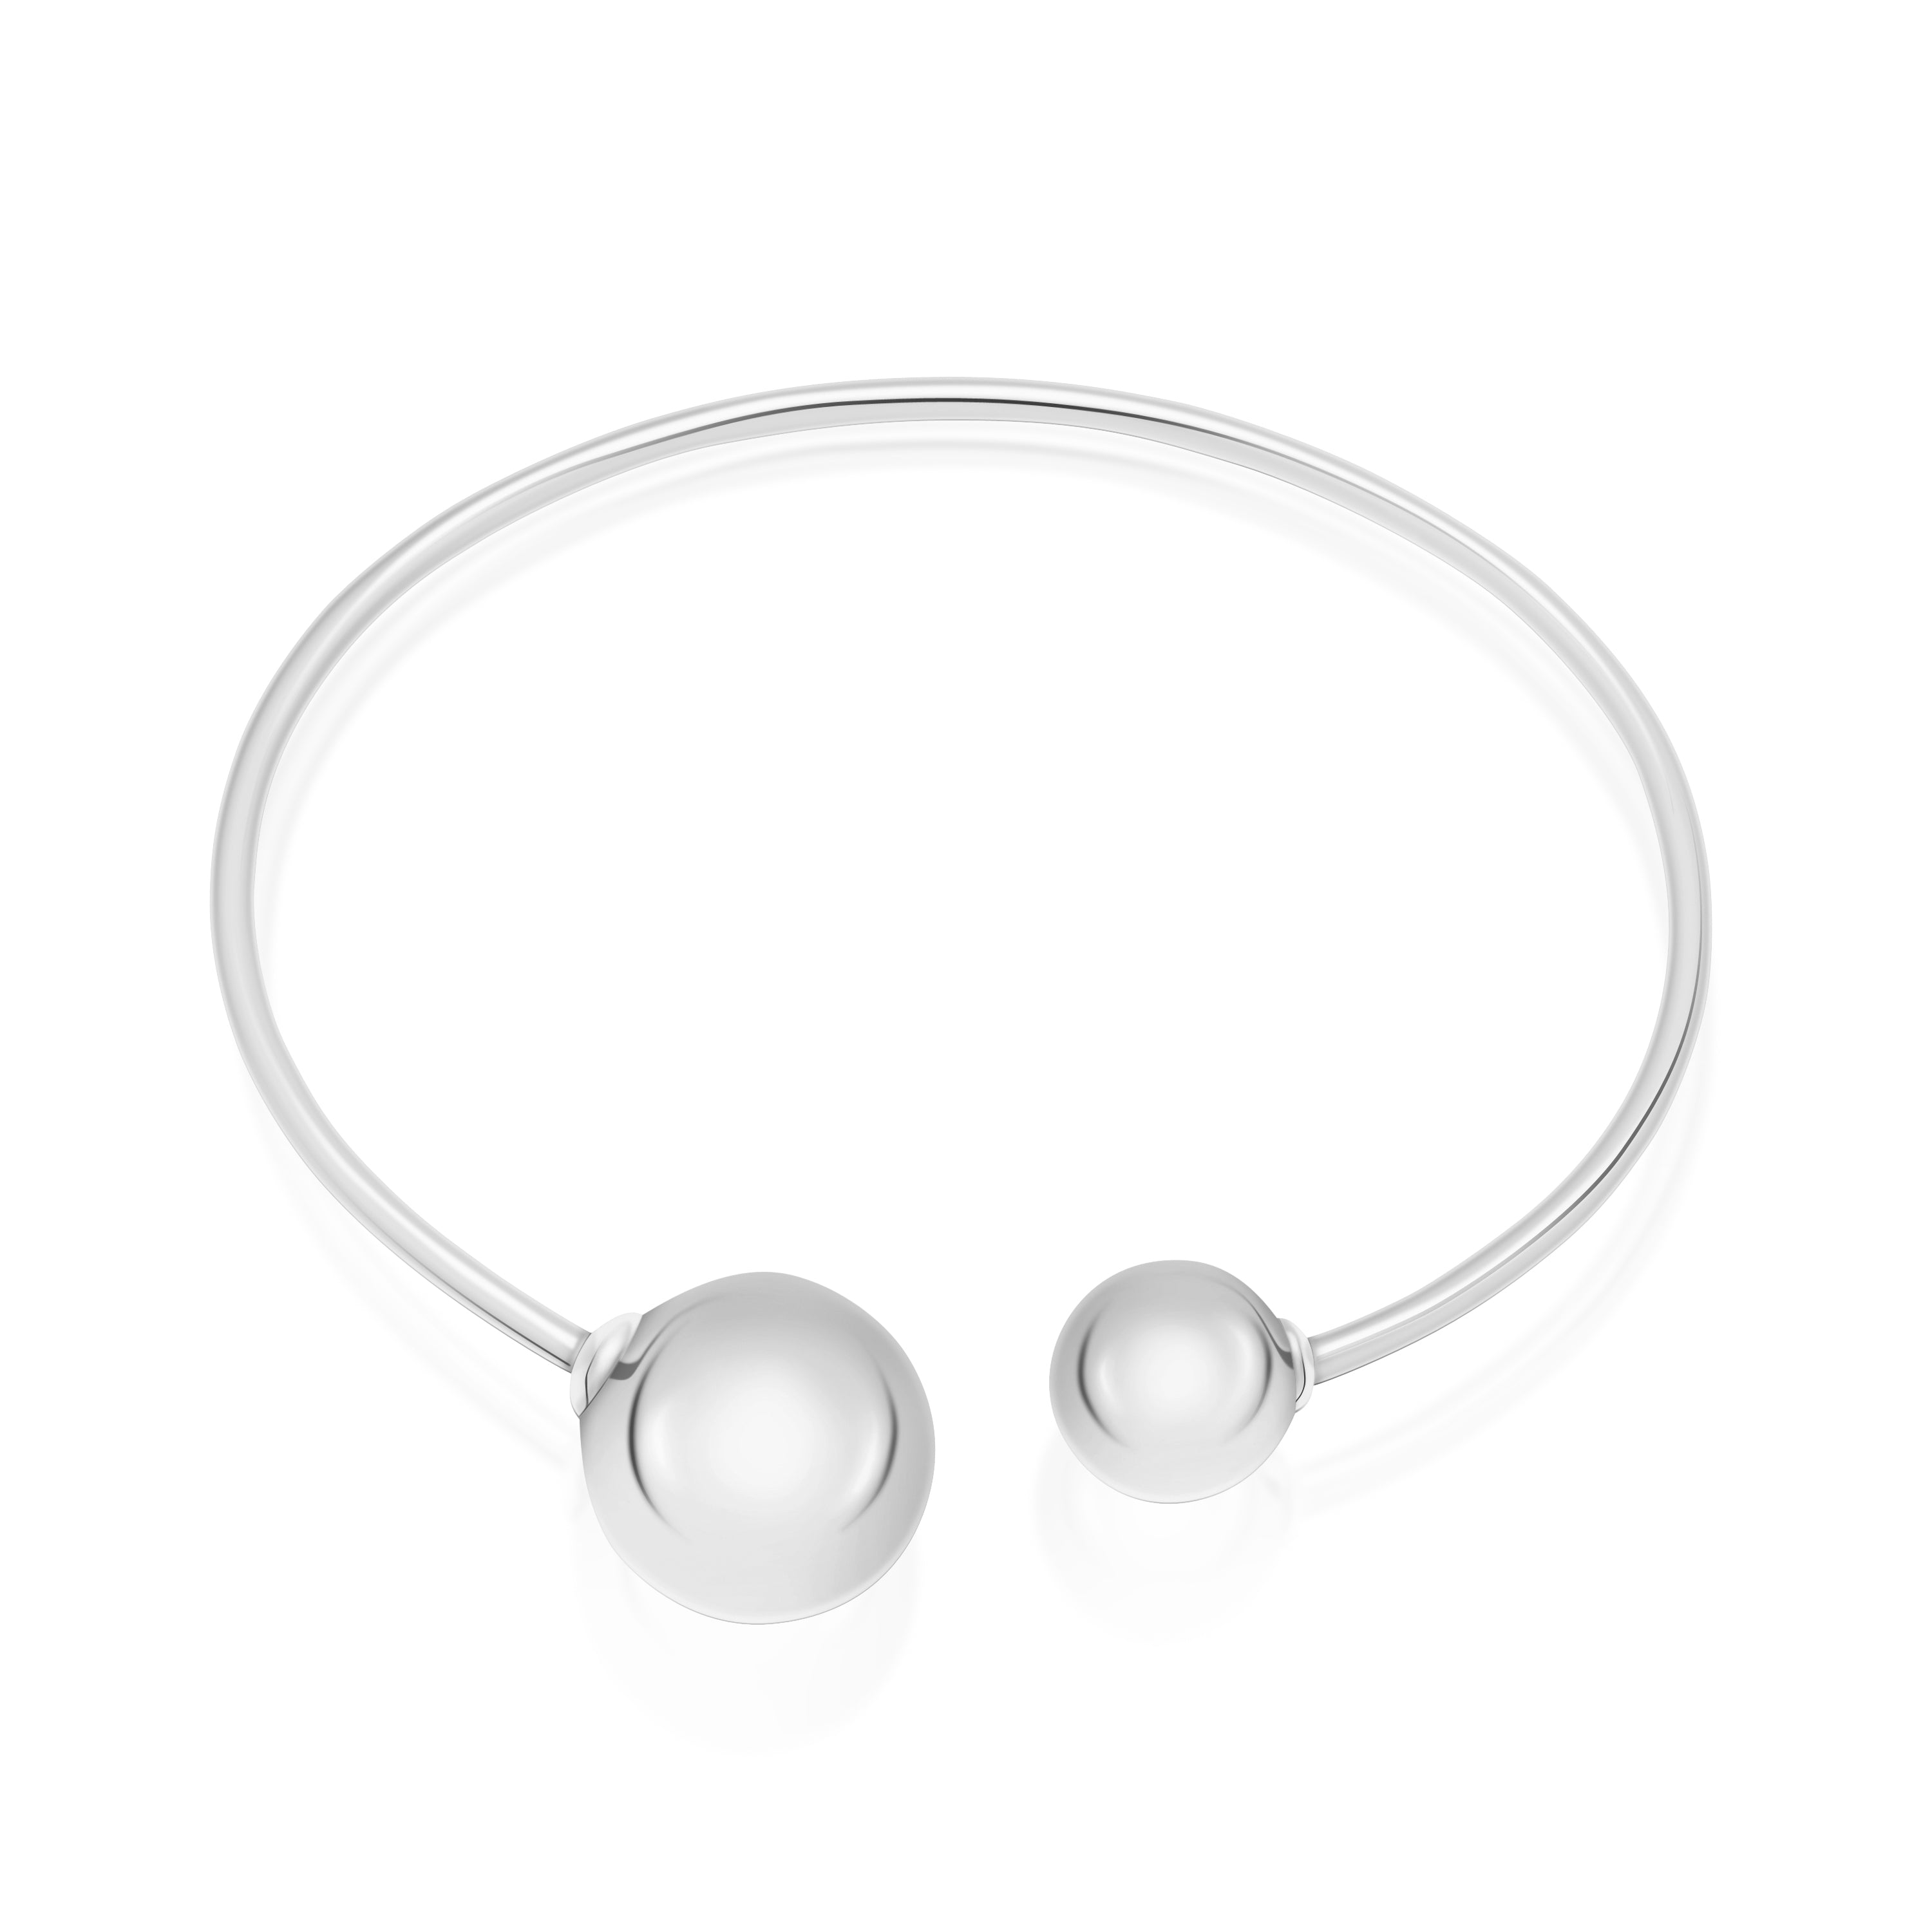 Sterling Silver 925 Polished Double Ball Wire Bracelet